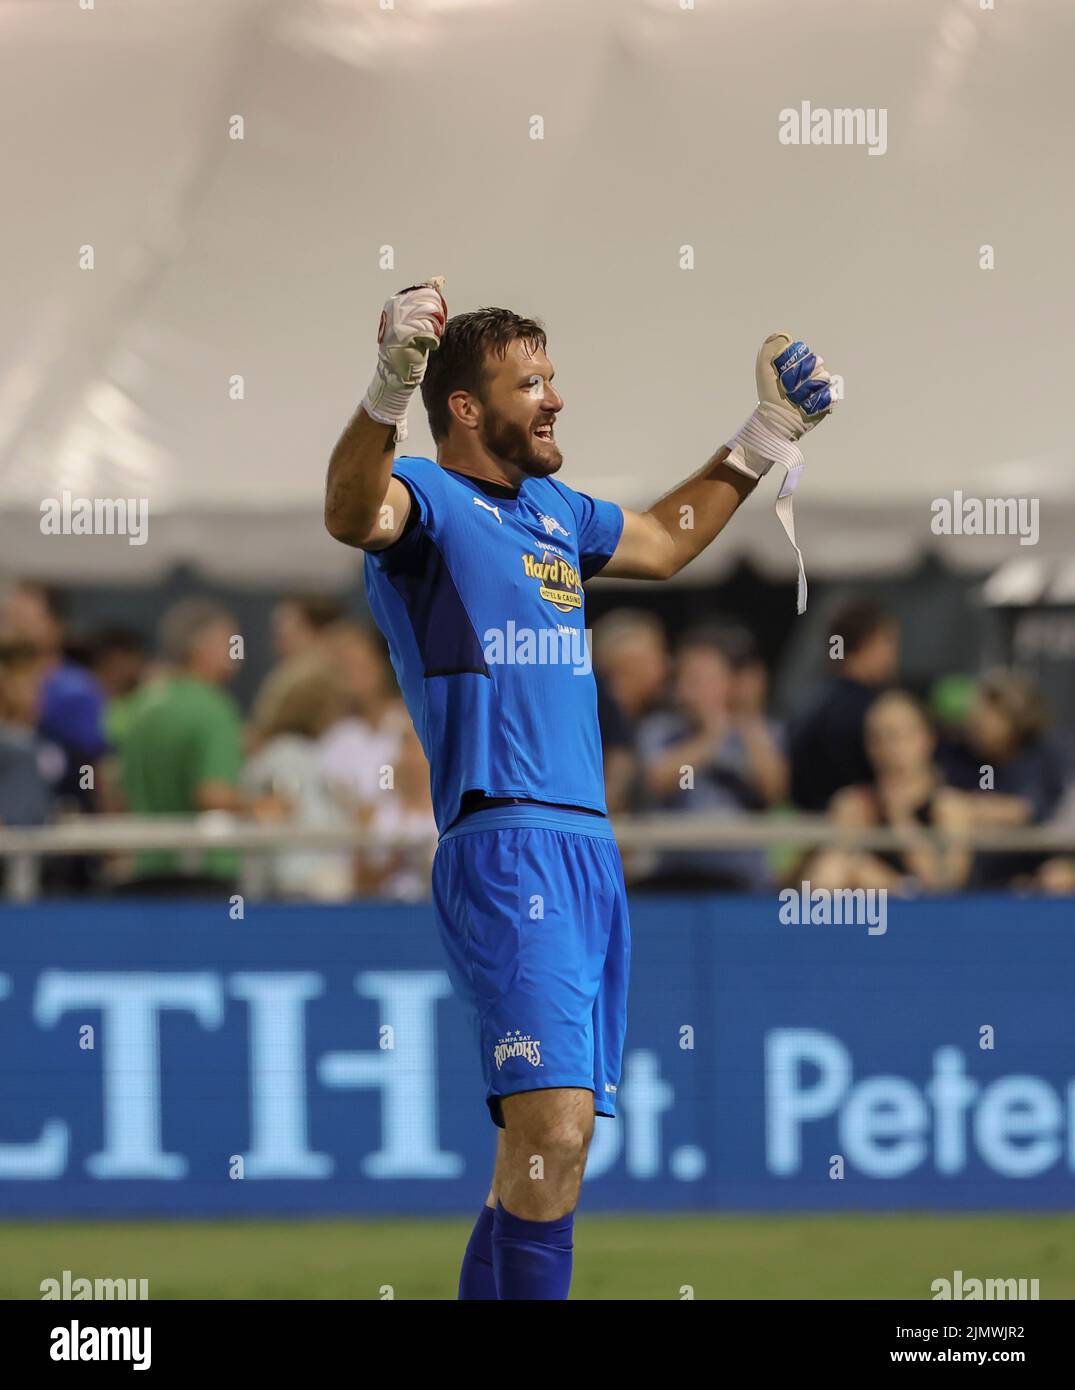 St. Petersburg, FL: Tampa Bay Rowdies goalkeeper C.J. Cochran (1) celebrates the win and shutout after a USL soccer game against Detroit City, Saturda Stock Photo